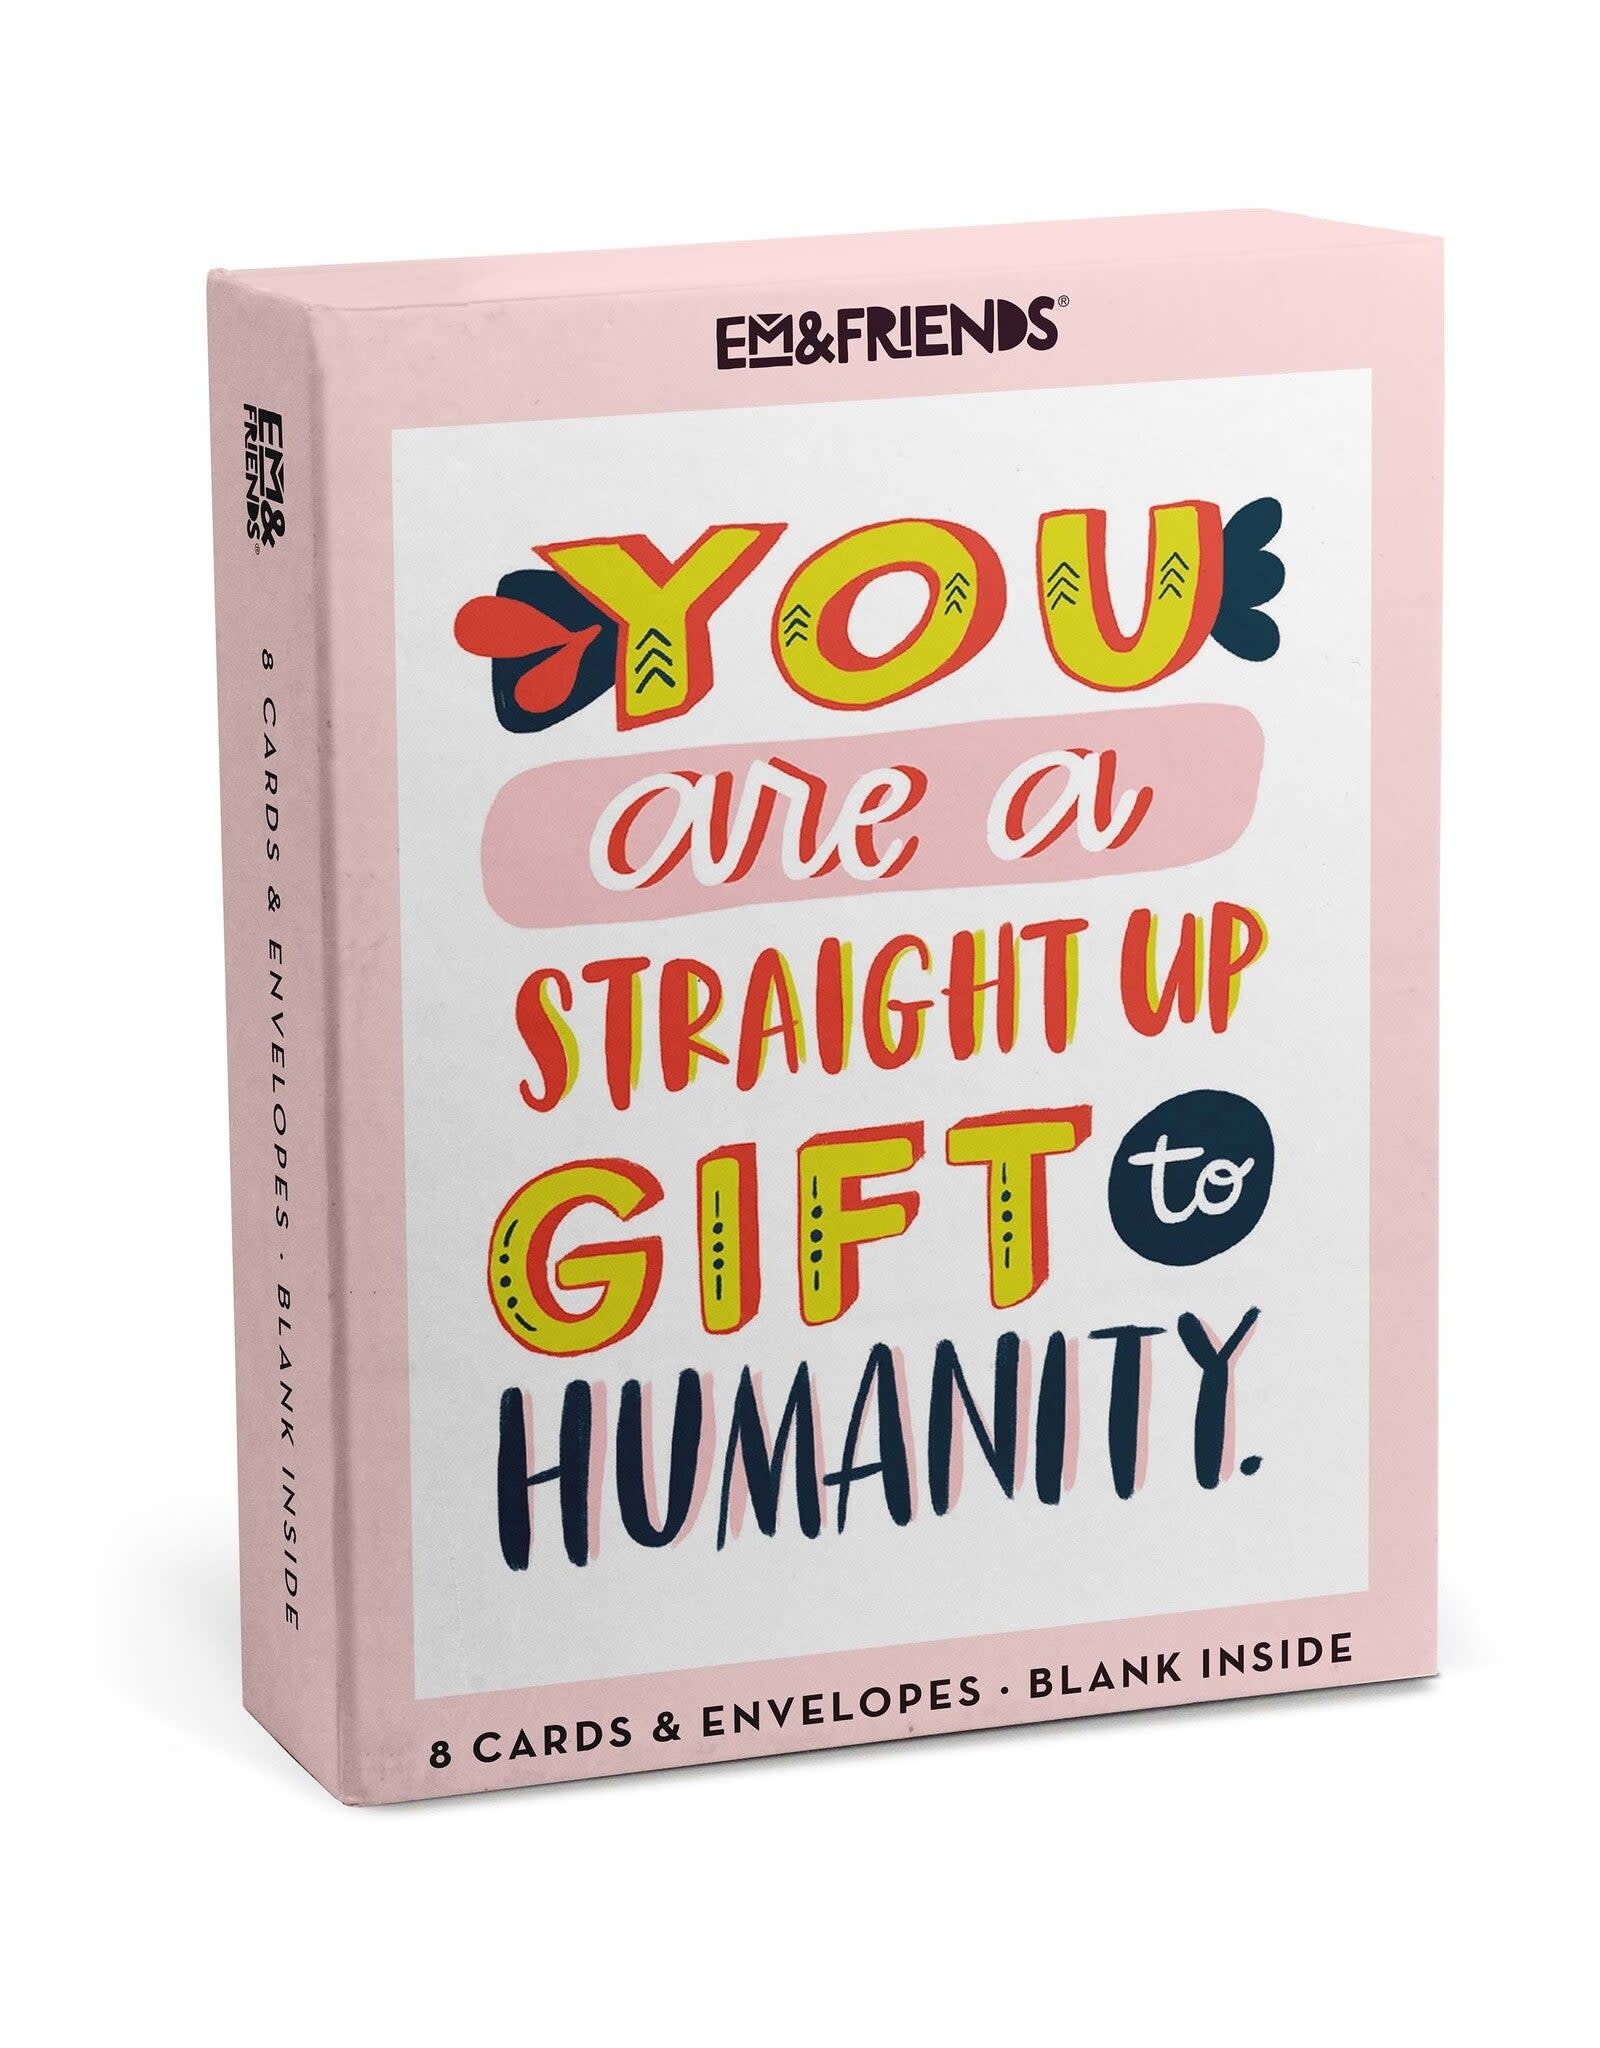 Em & Friends Straight Up Gift To Humanity Boxed